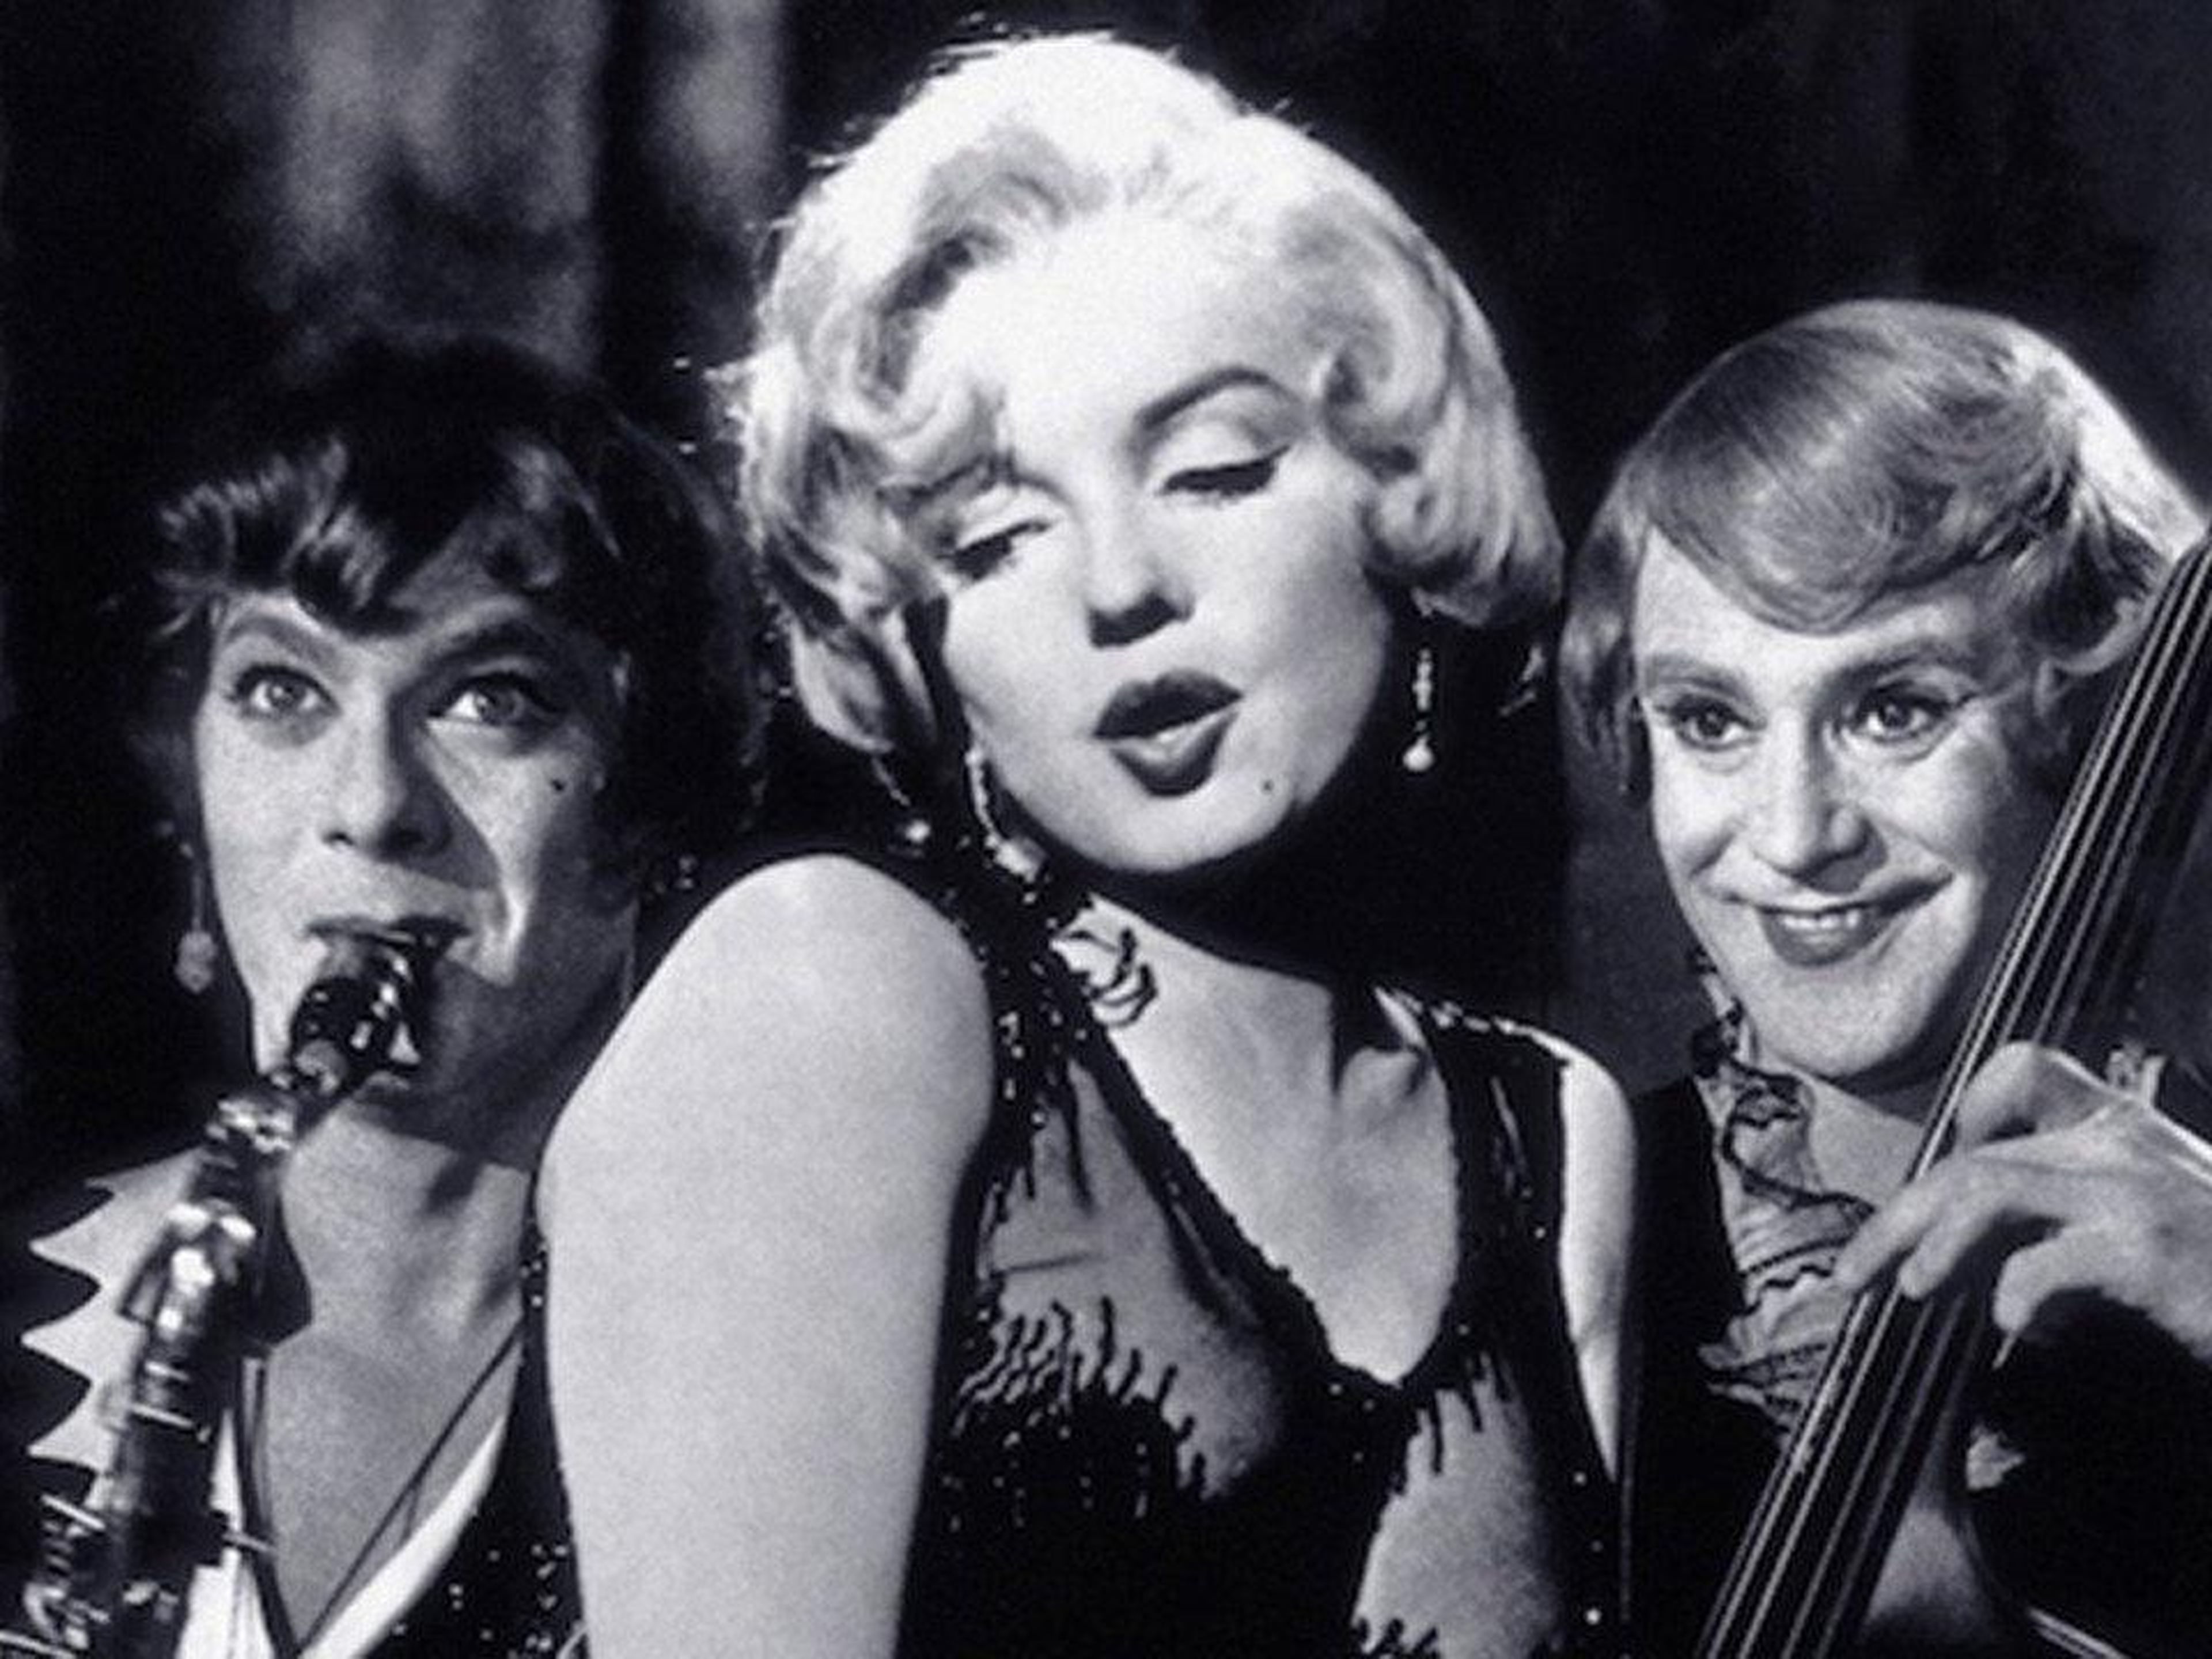 15. "Some Like It Hot" (1959)